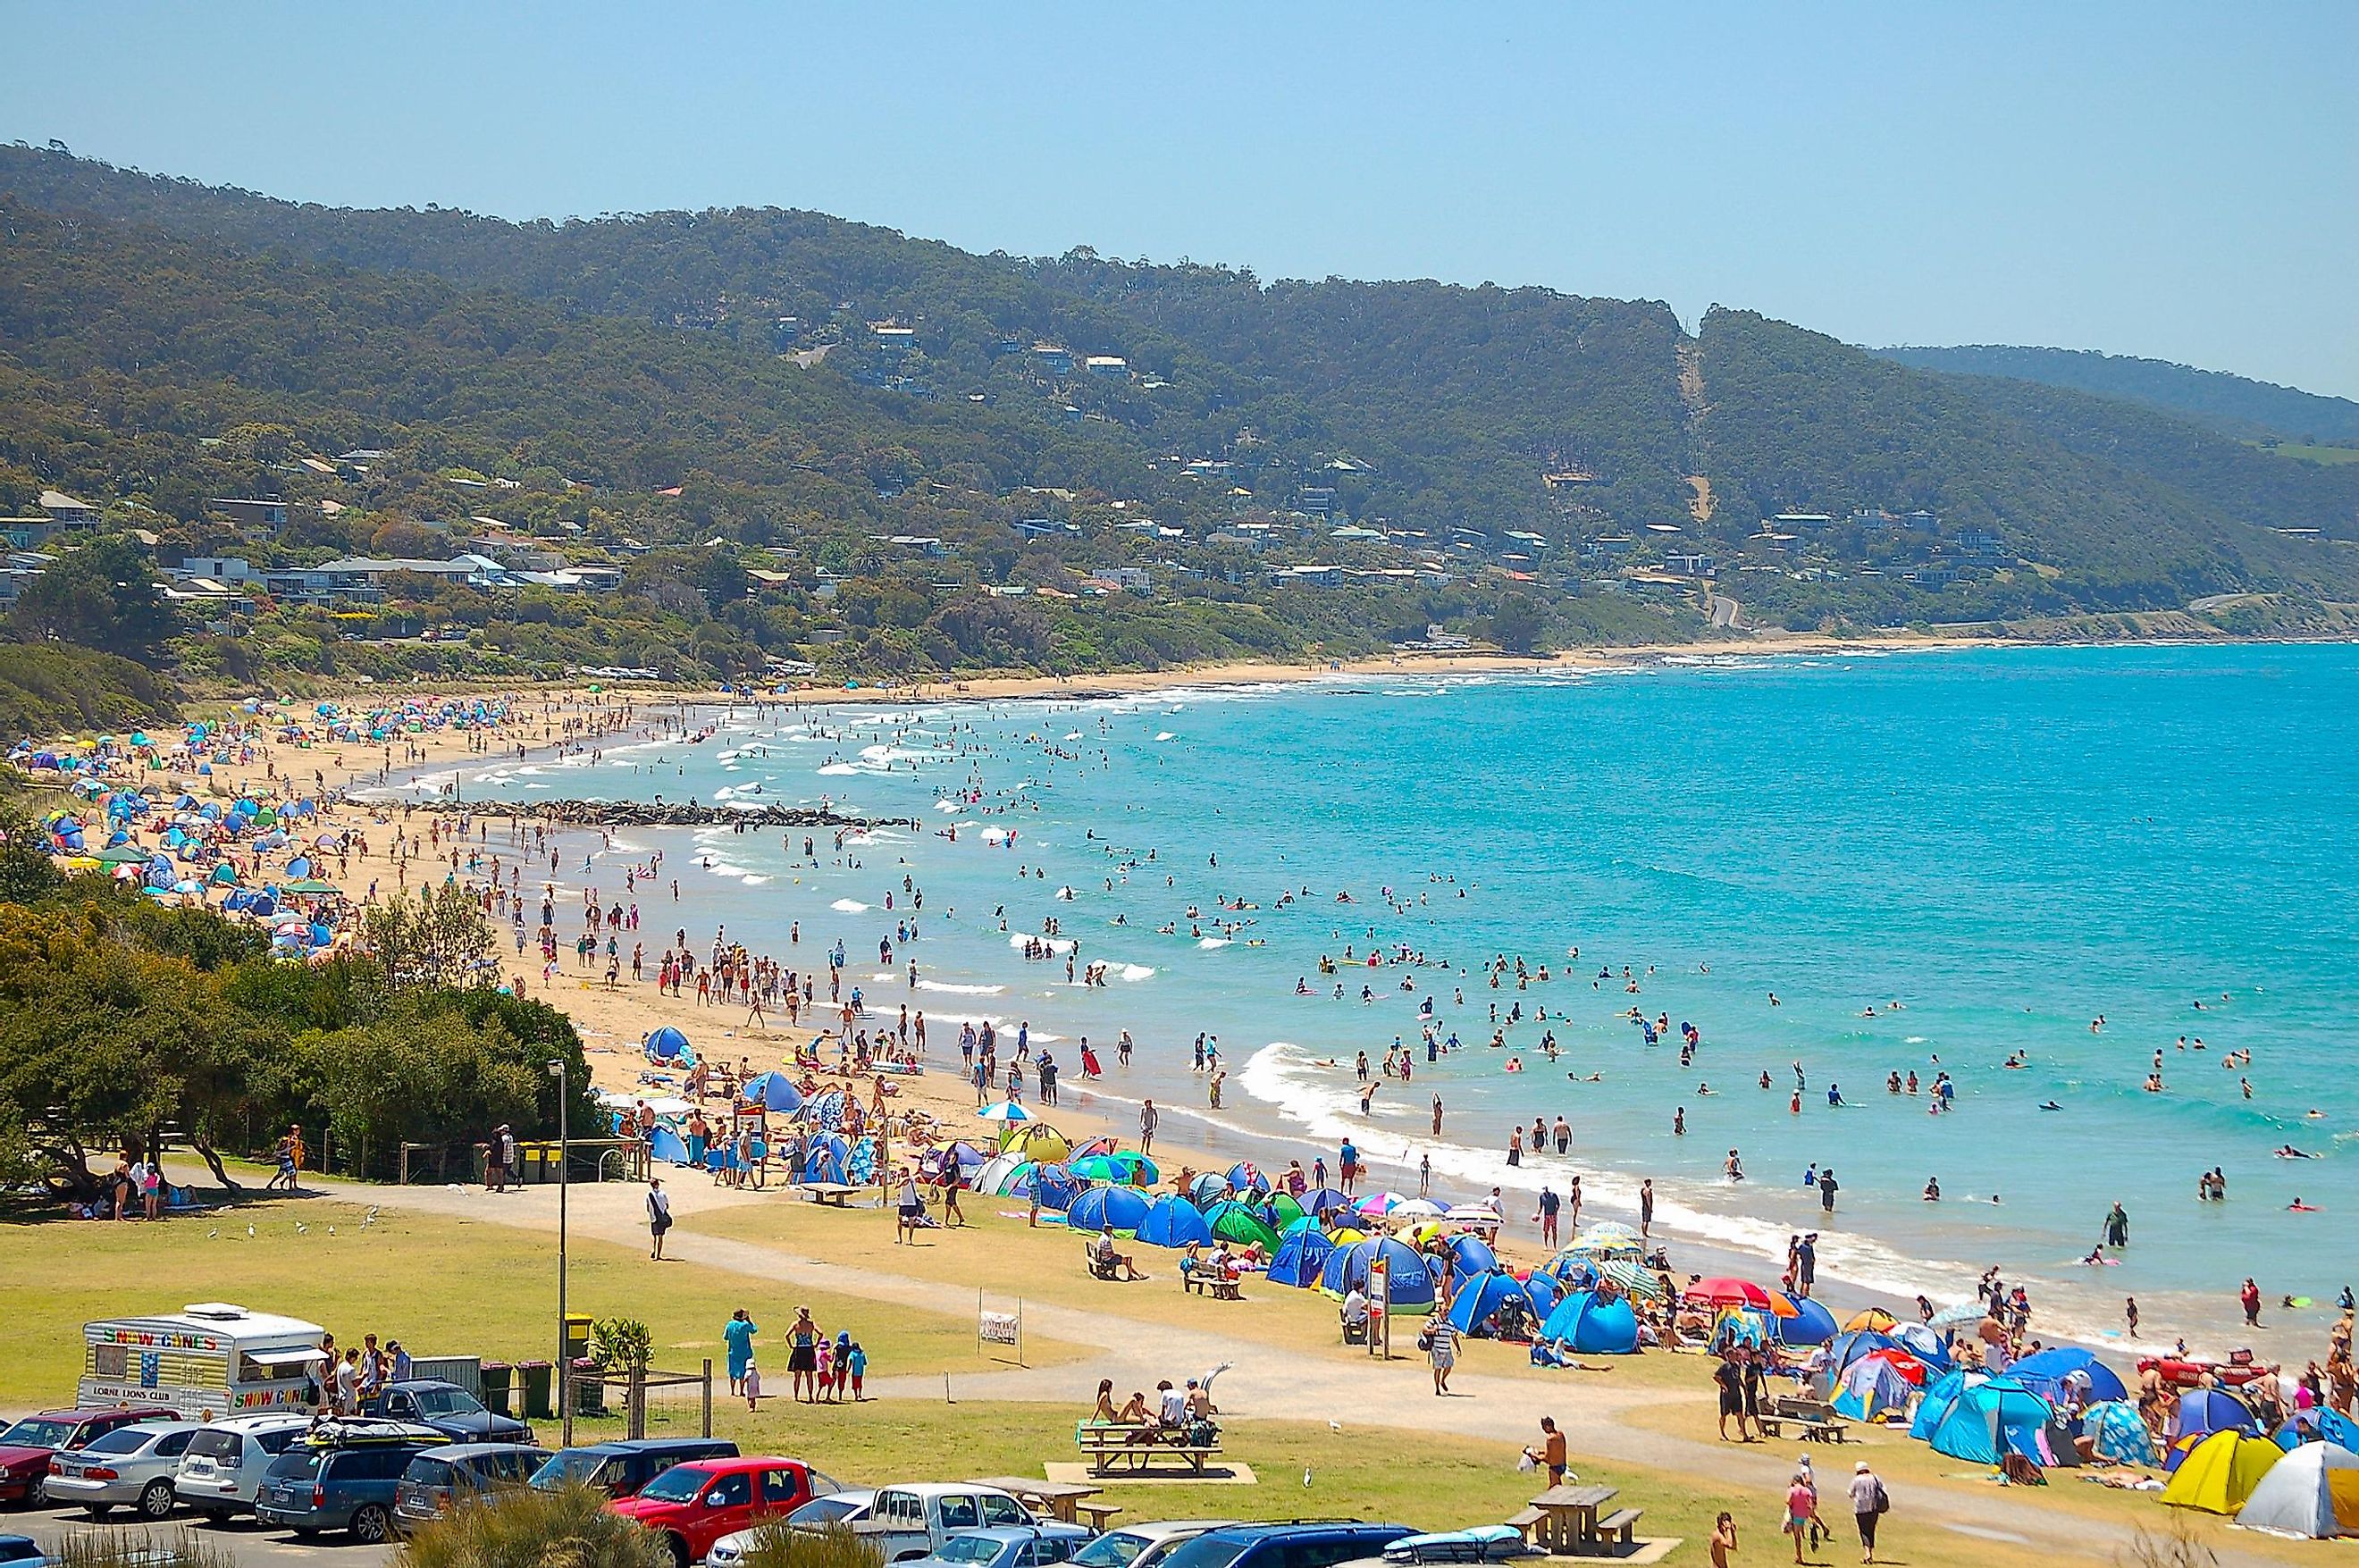 Vacationers enjoy the refreshing water in a summer heat wave on the beach of Lorne in Victoria, Australia